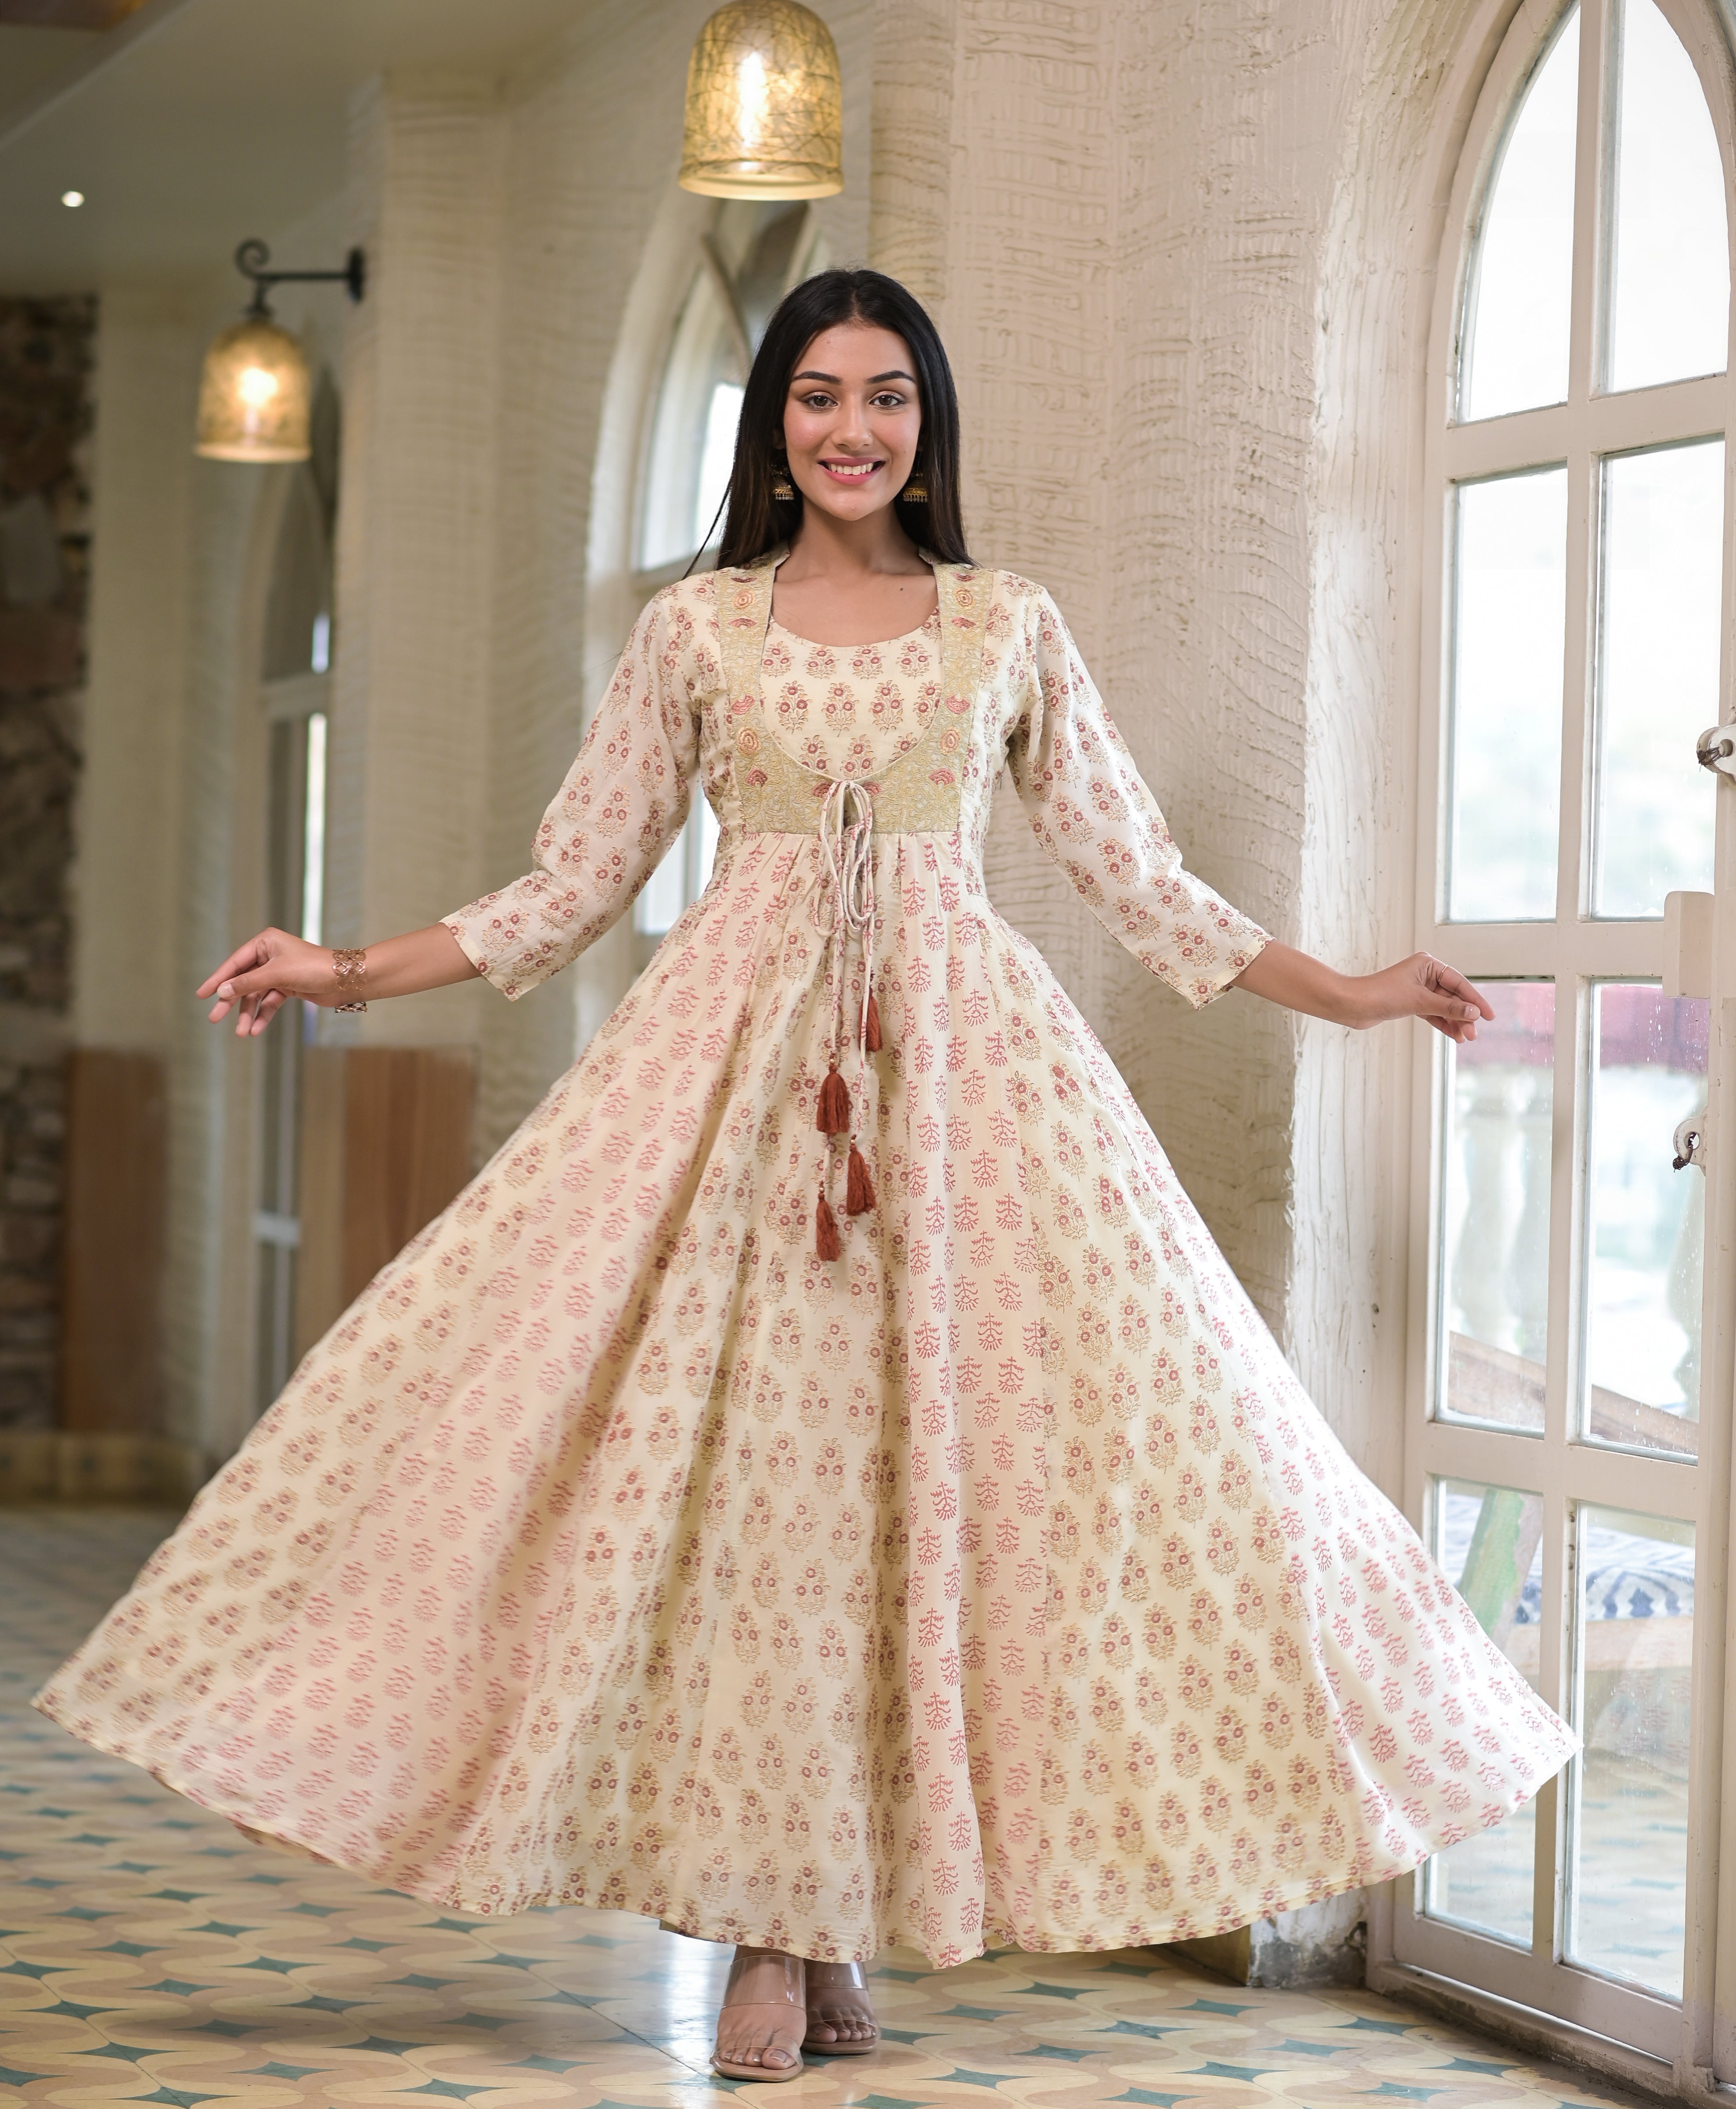 Mughal Hand Block Embroidered Dress